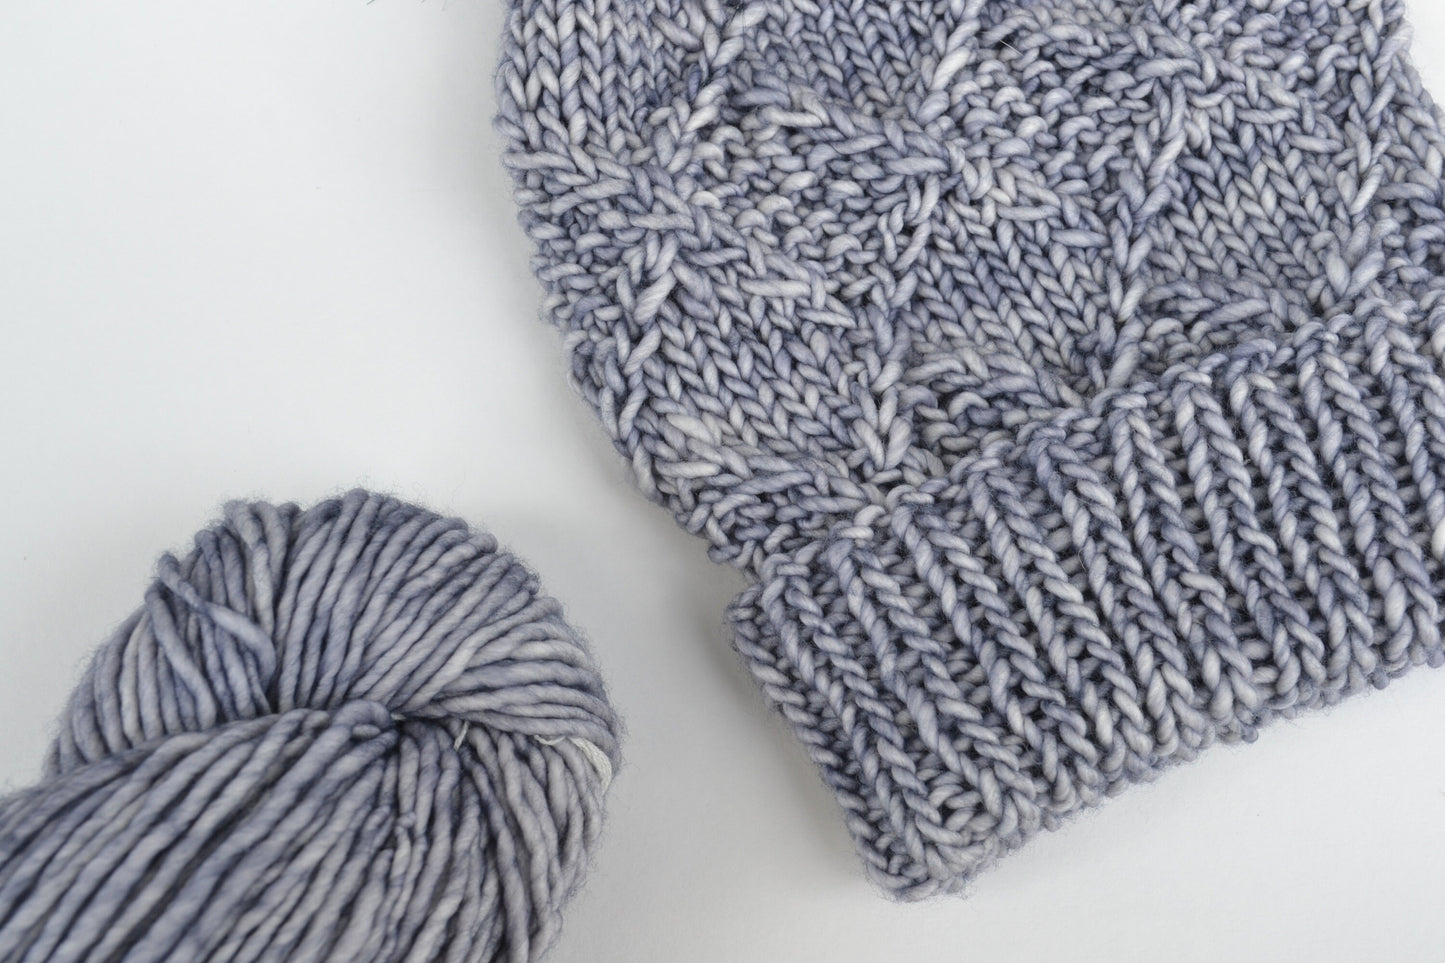 KNITTING PATTERN: North Loop Beanie | Cable Knit Hat Pattern | Bulky Yarn Knitting Pattern